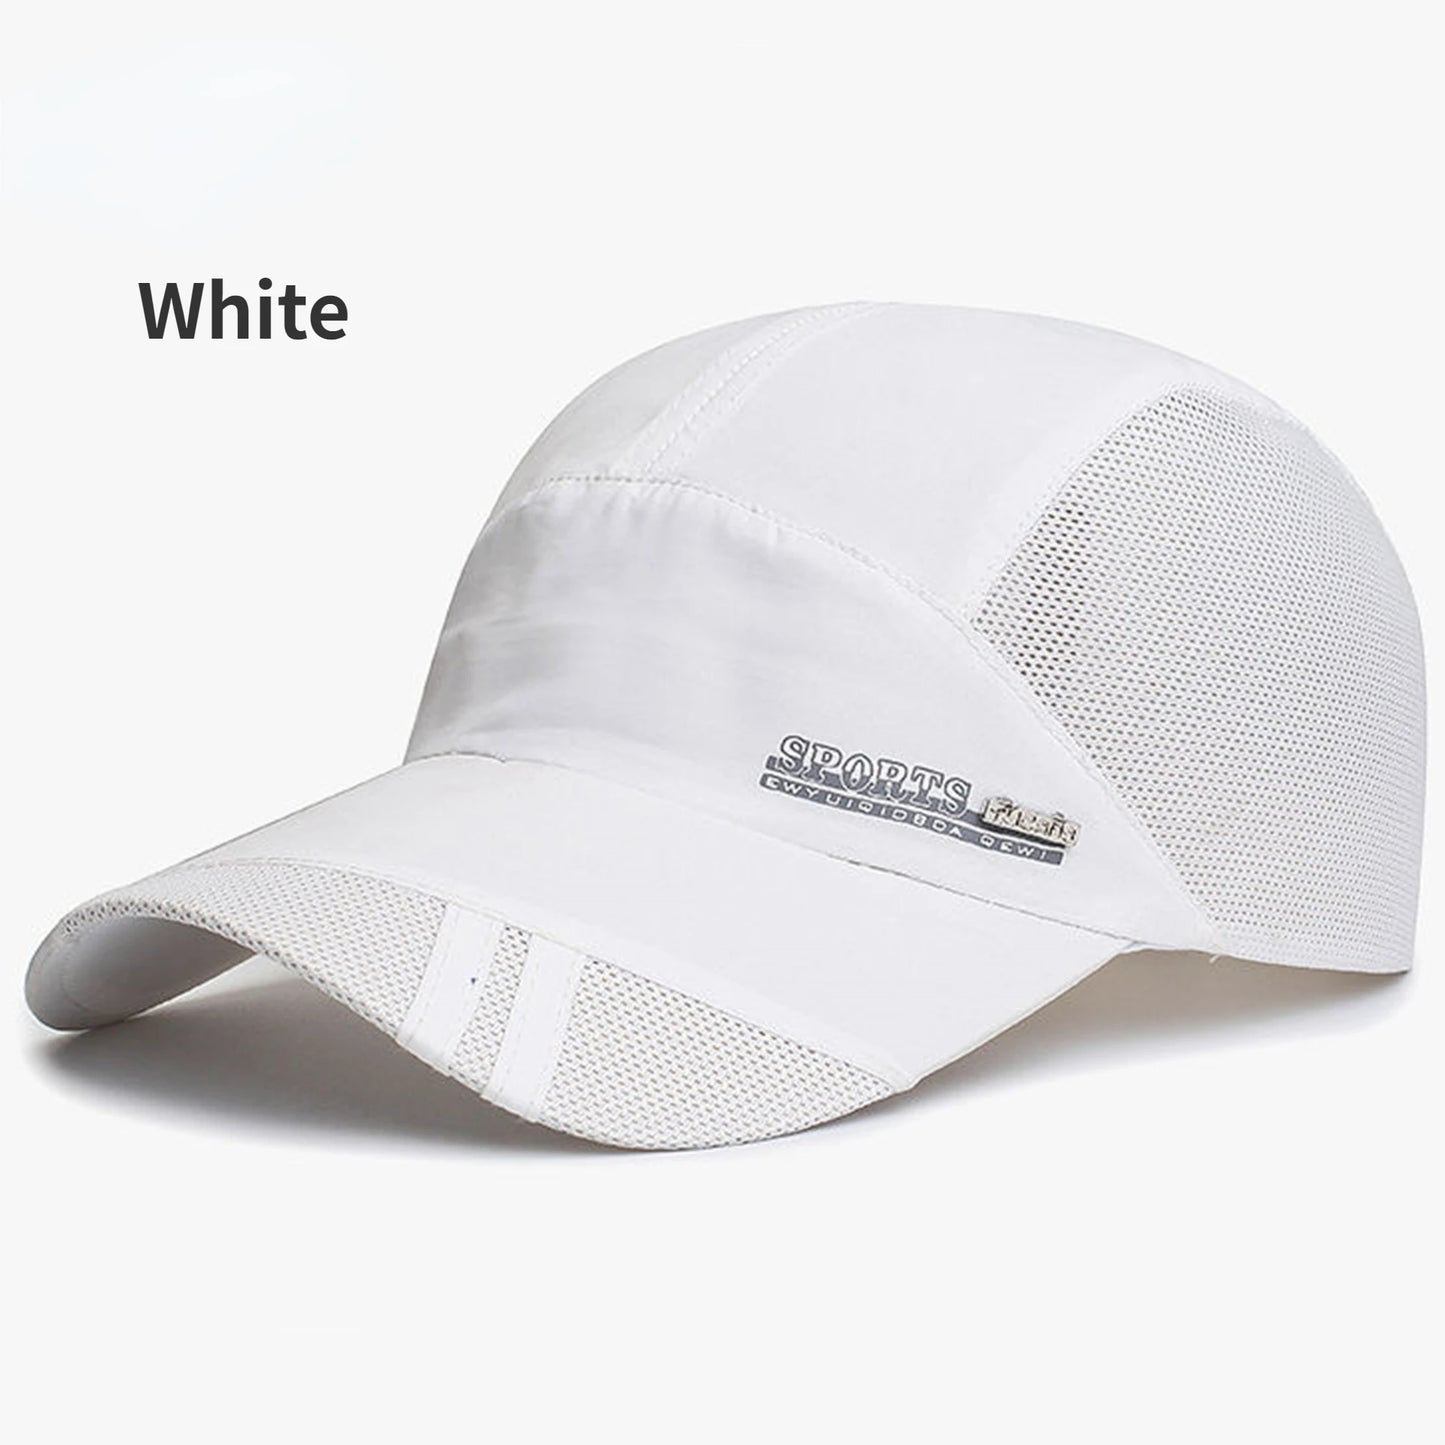 Adjustable Quick-Dry Breathable Mesh Cap